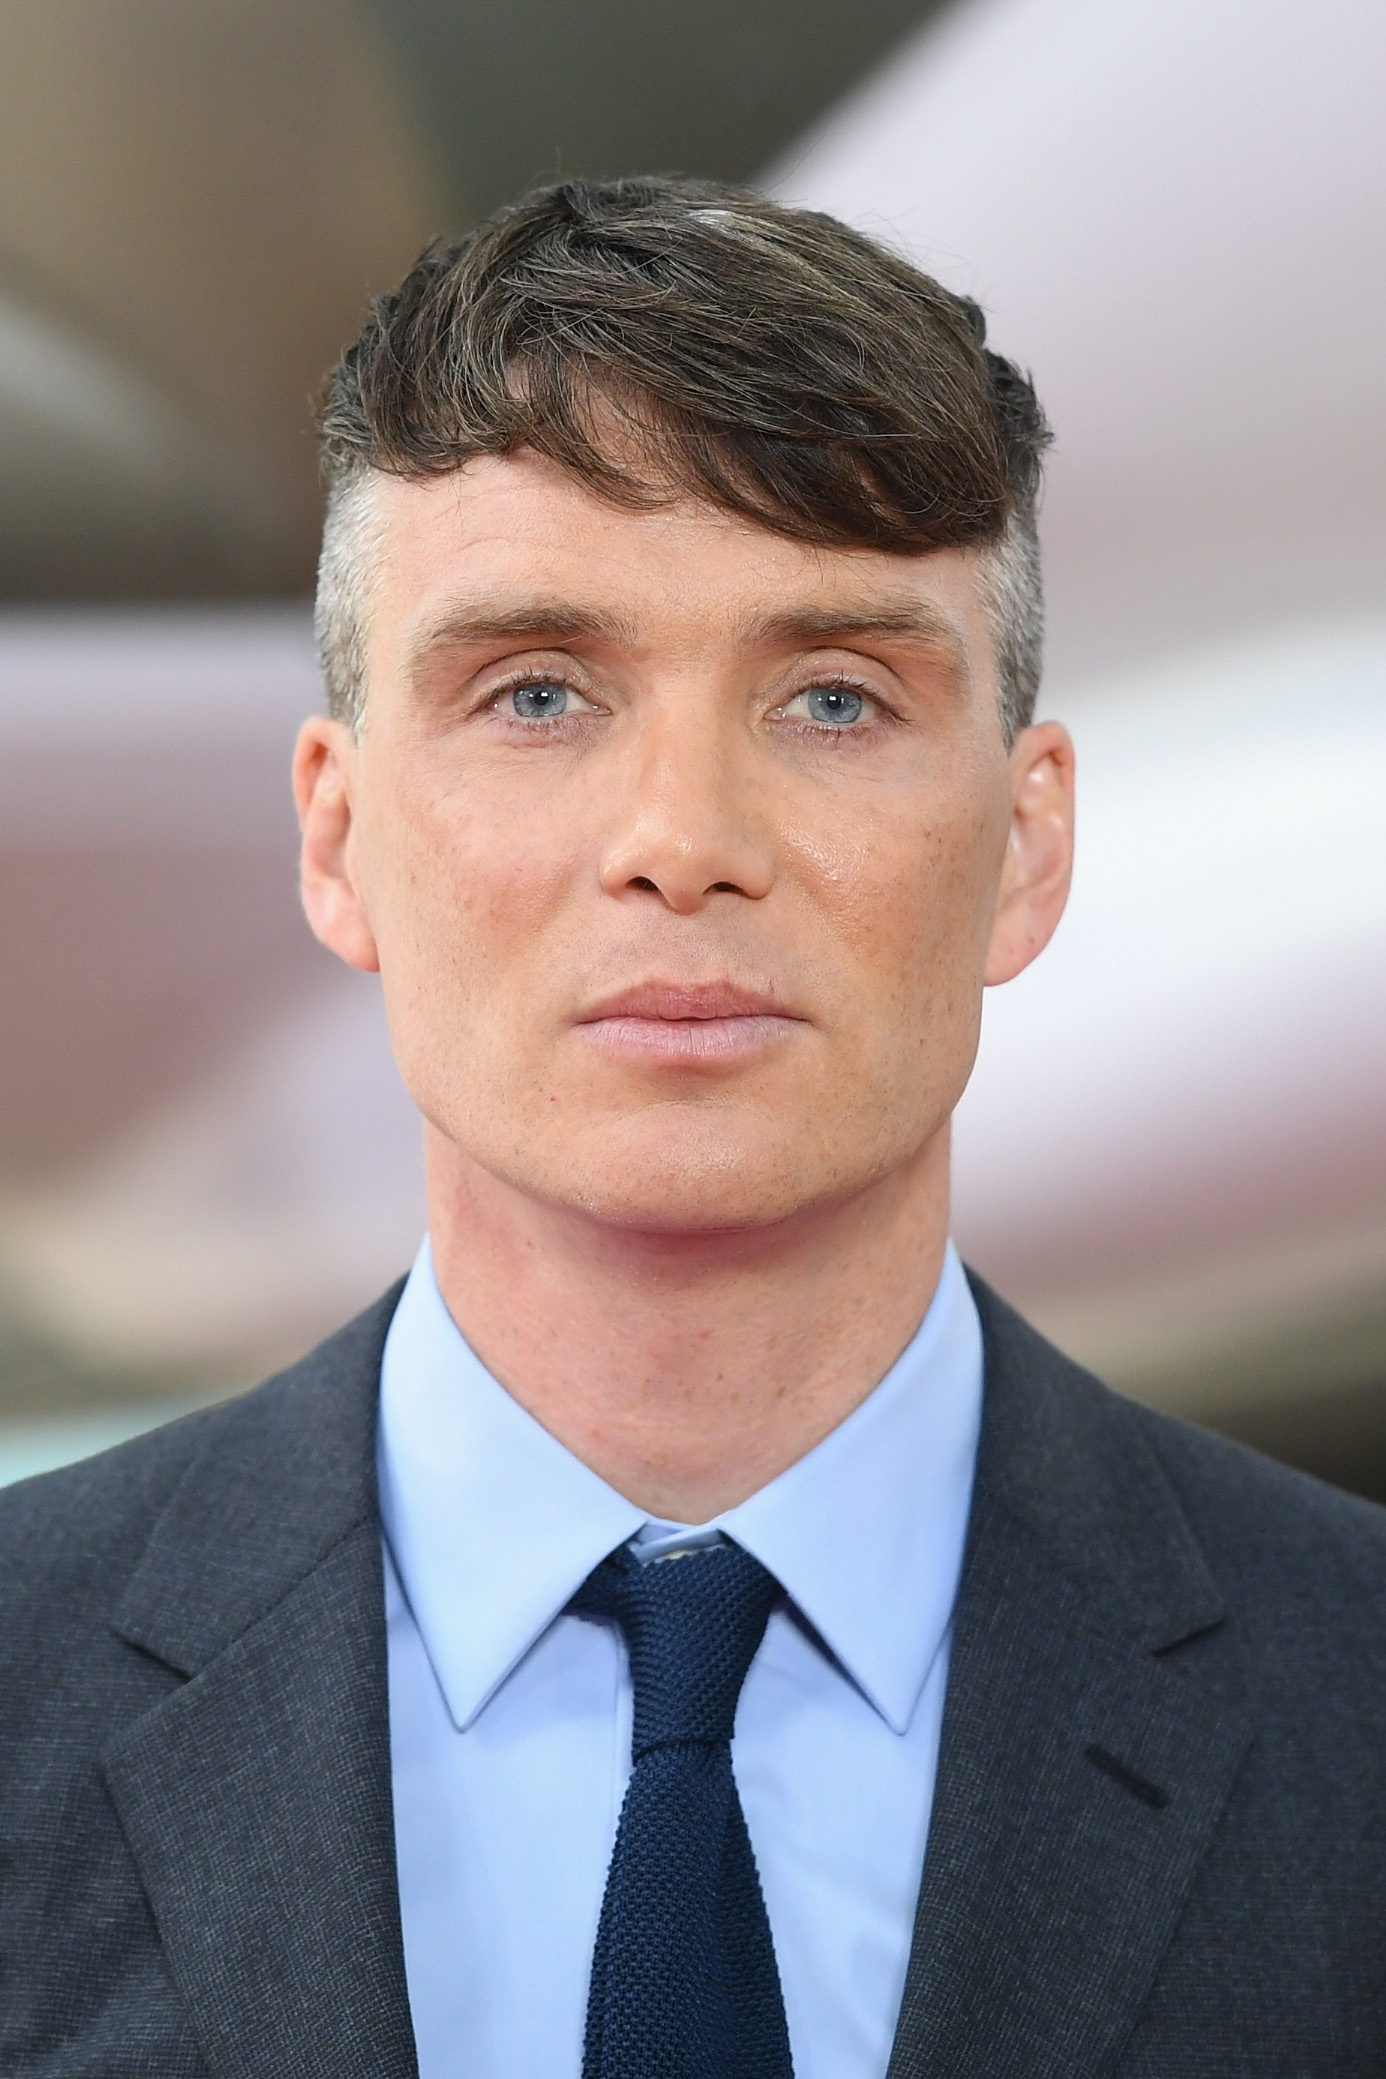 Cillian Murphy attends the "Dunkirk" premiere on July 13, 2017 in London, England | Source: Getty Images